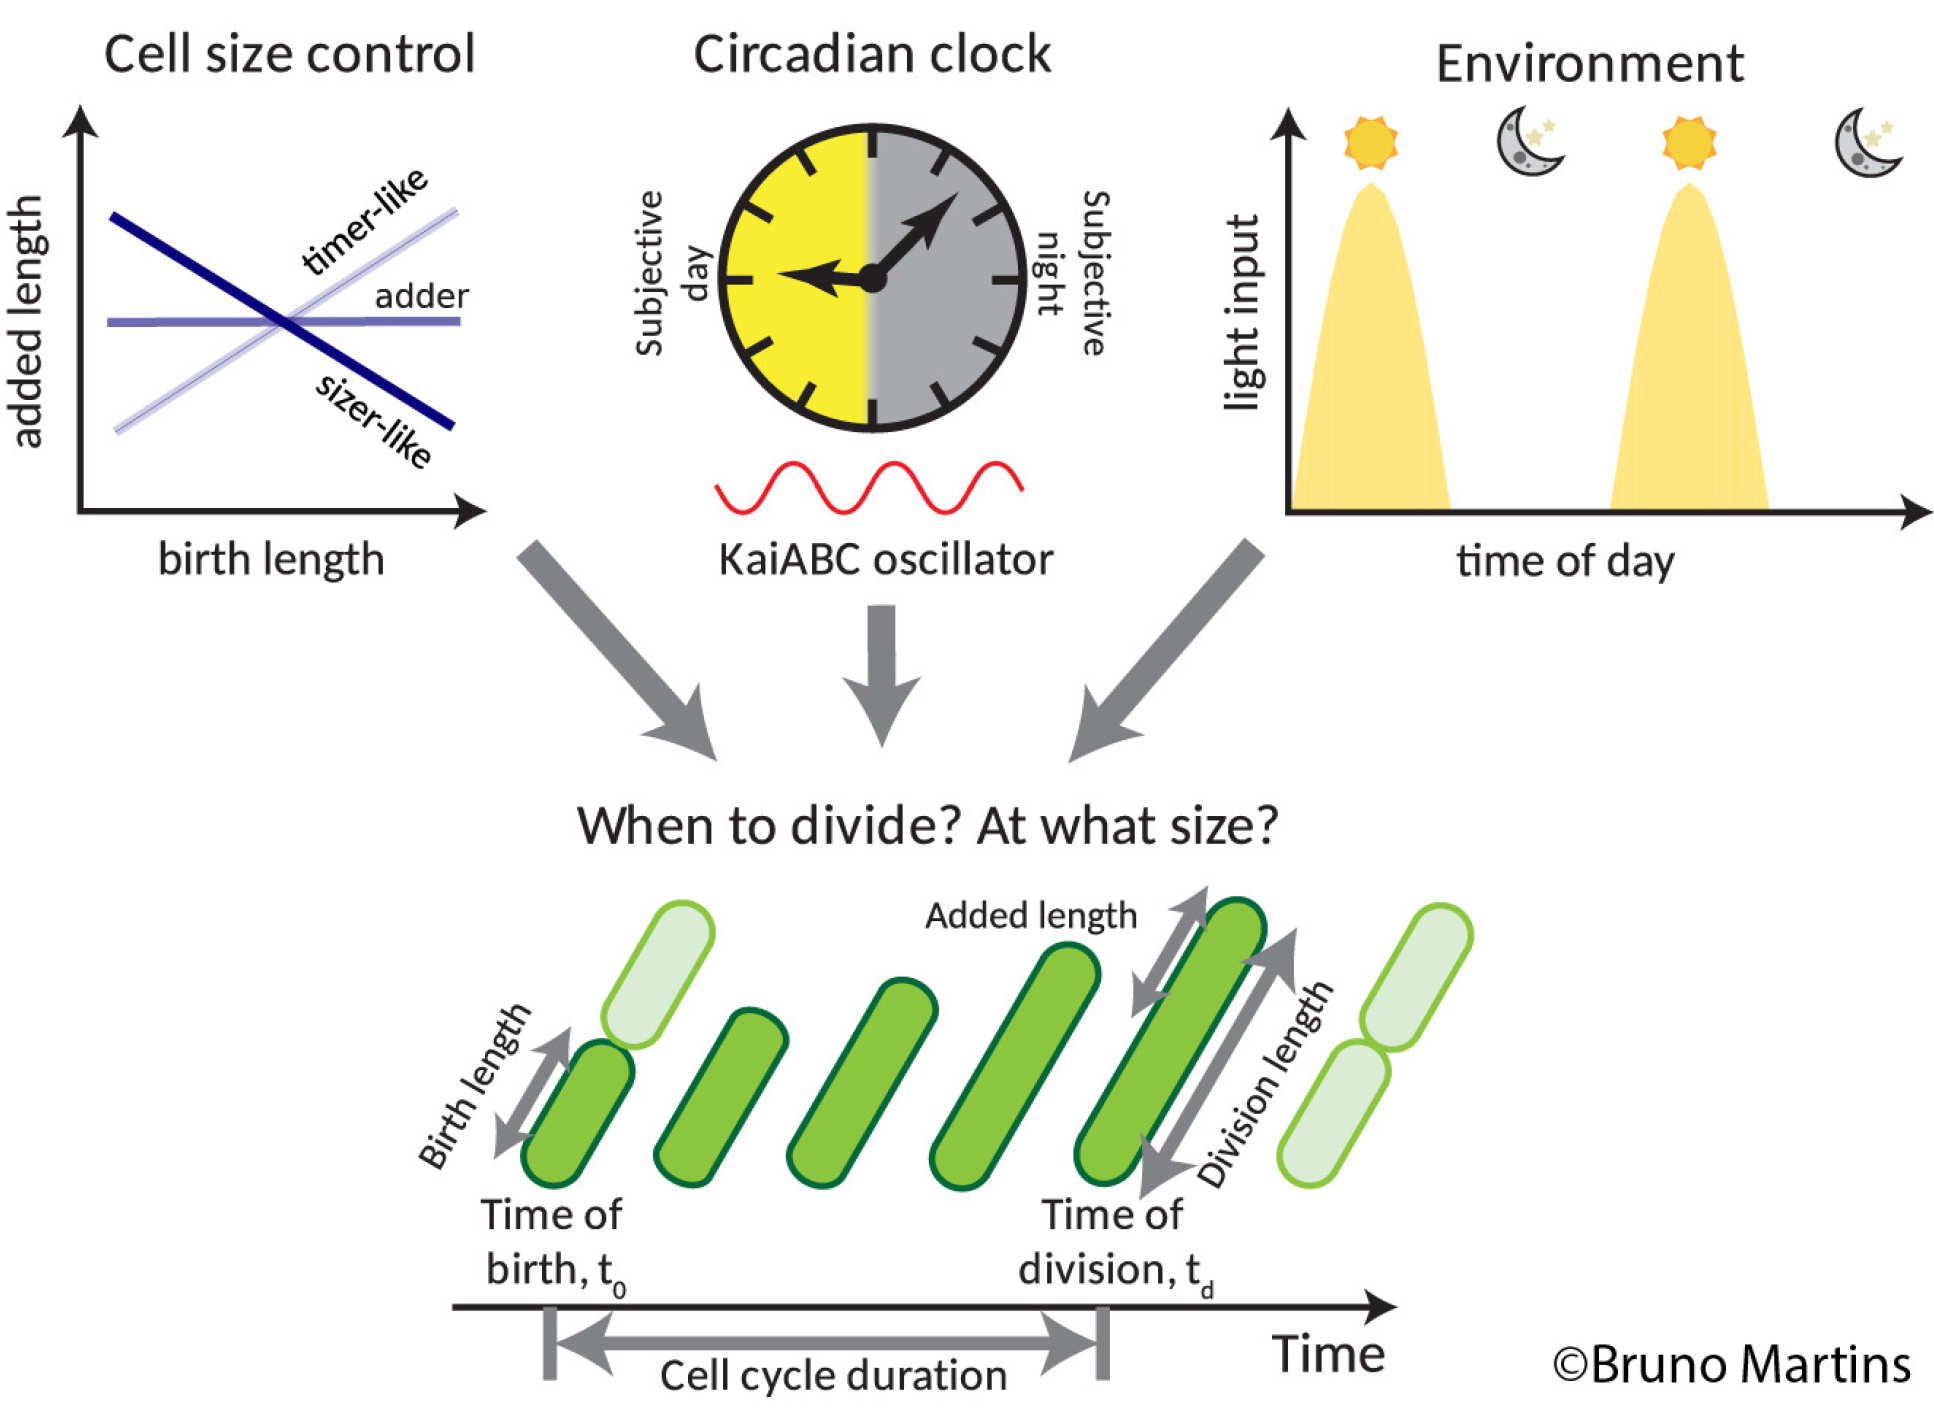 A graph of cell size, an image of a clock with day/night portion, and a graph of daylight and nighttime across 24 hours, all feeding into a graph showing different lengths of cells dividing at different times of the day